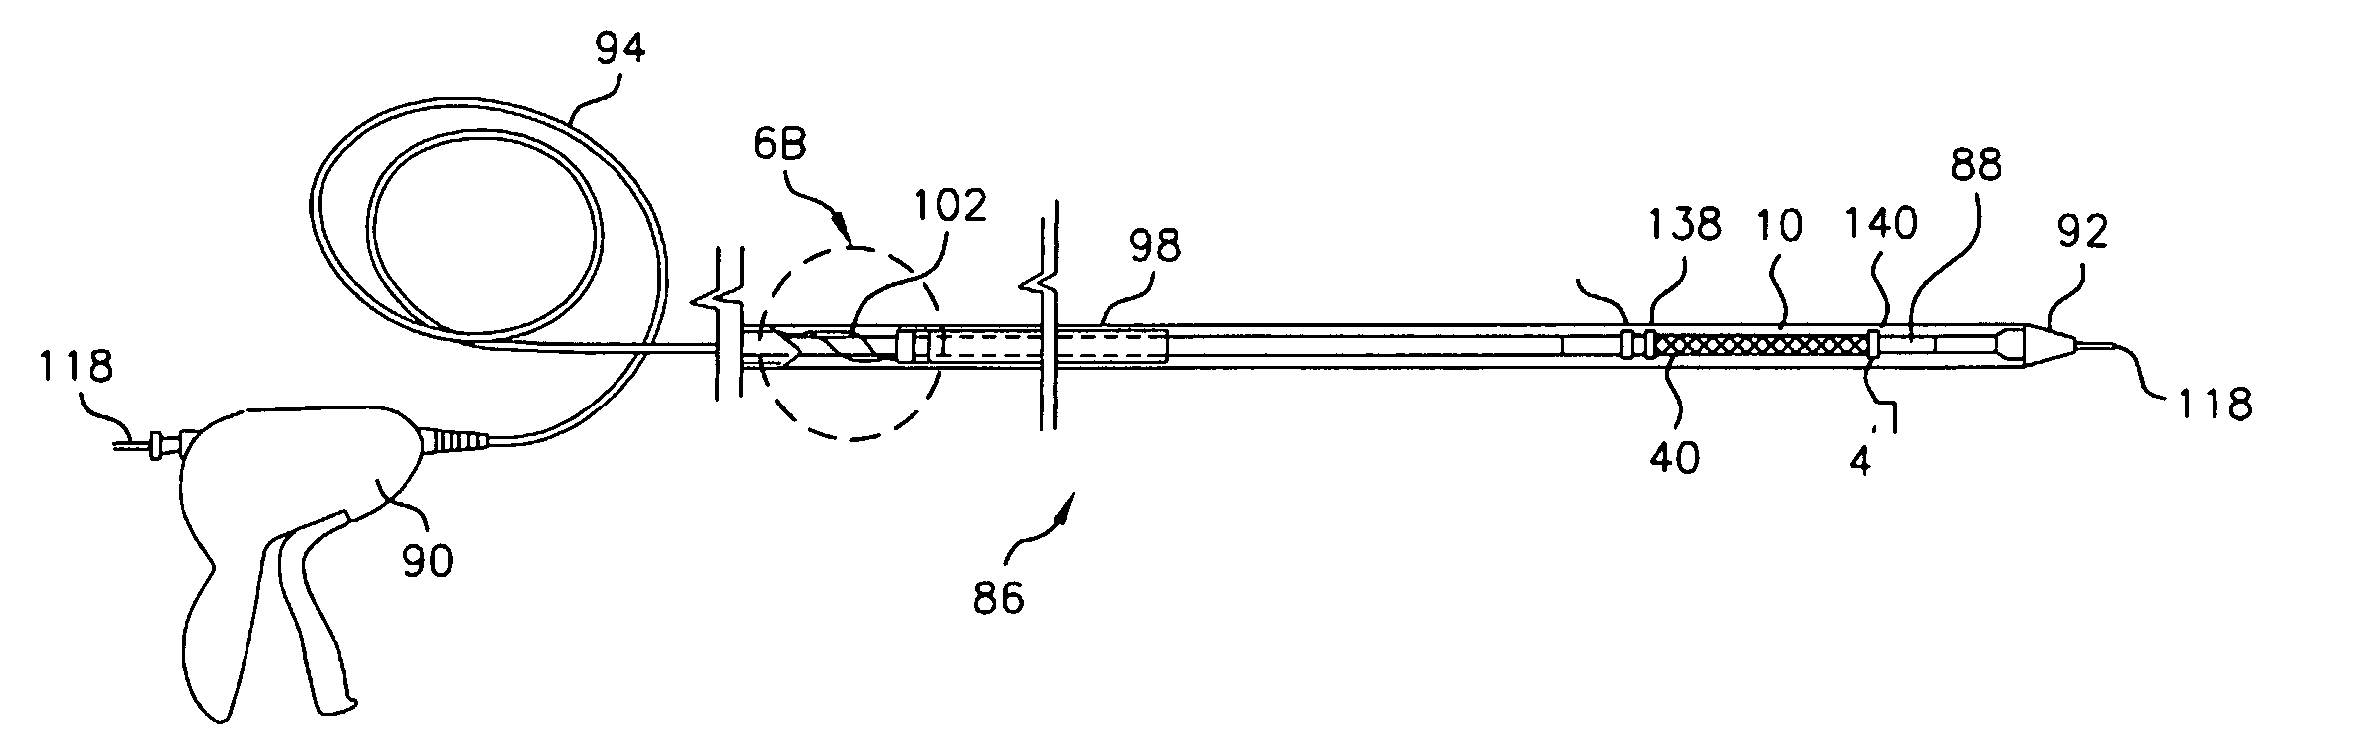 Electroactive polymer actuated sheath for implantable or insertable medical device